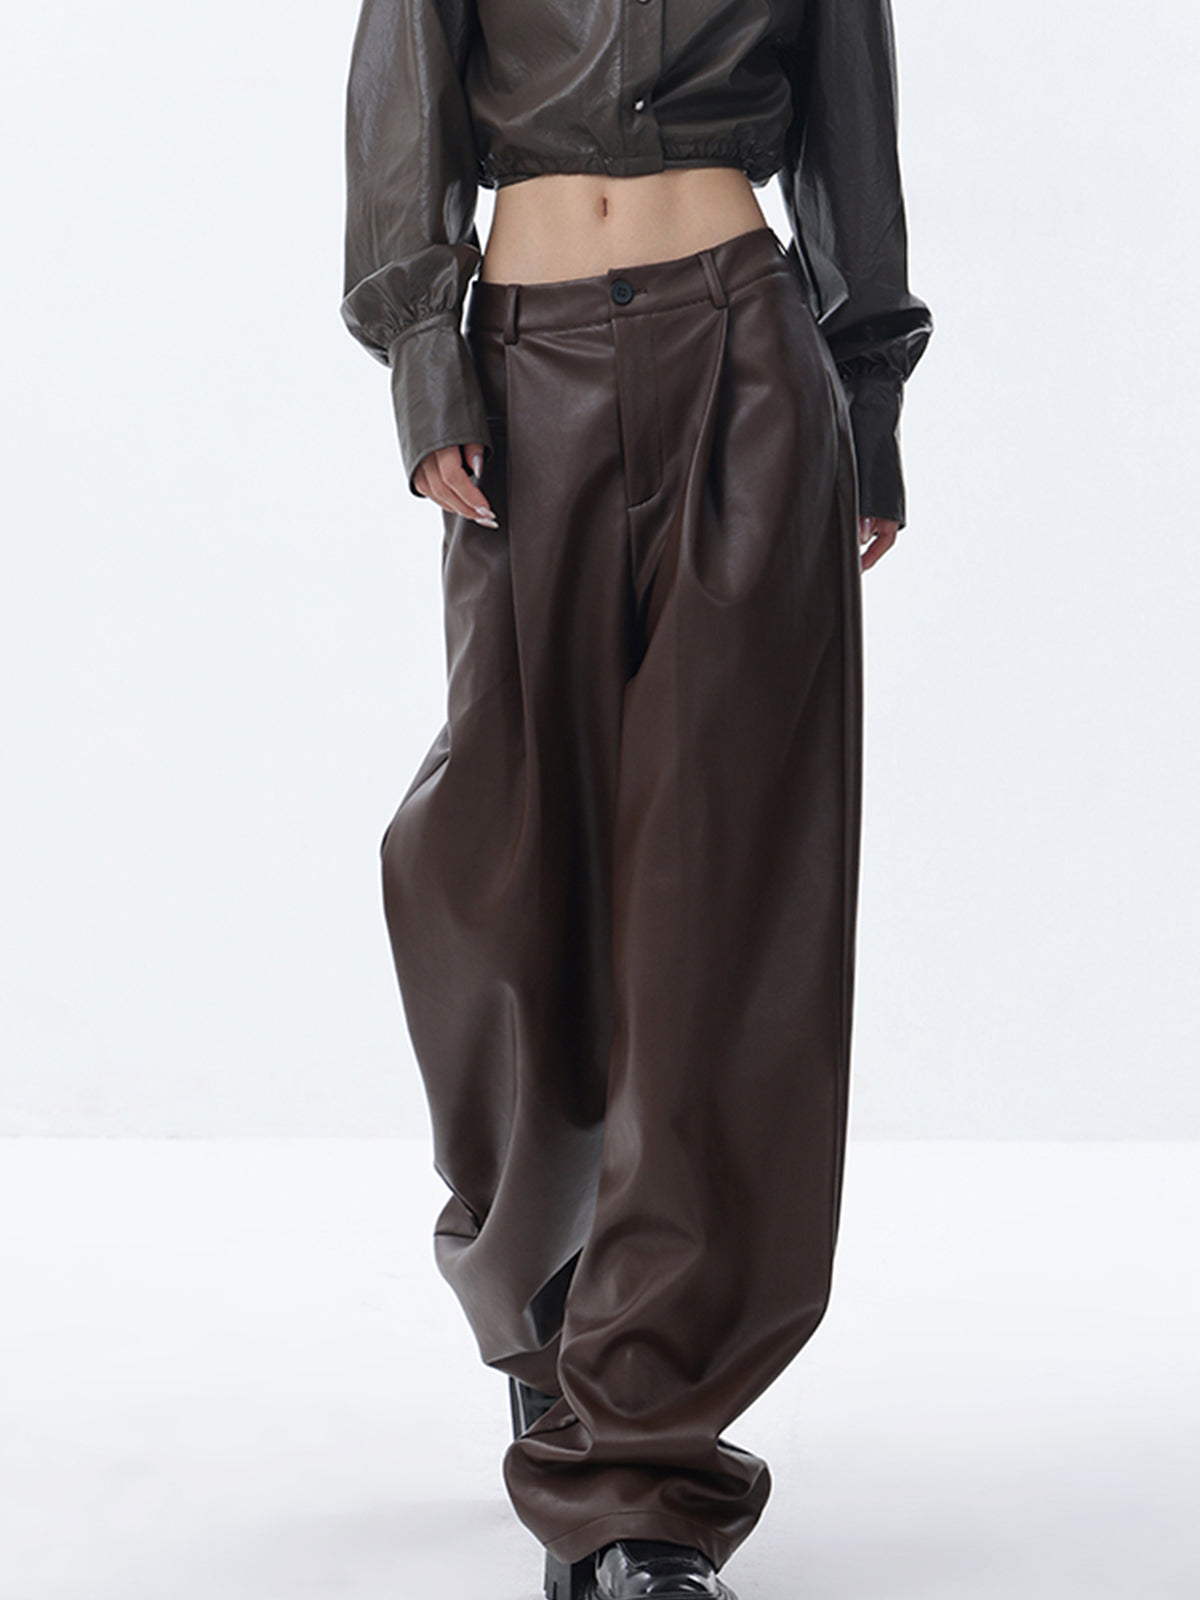 Meet You There Faux Leather Wide Leg Pants